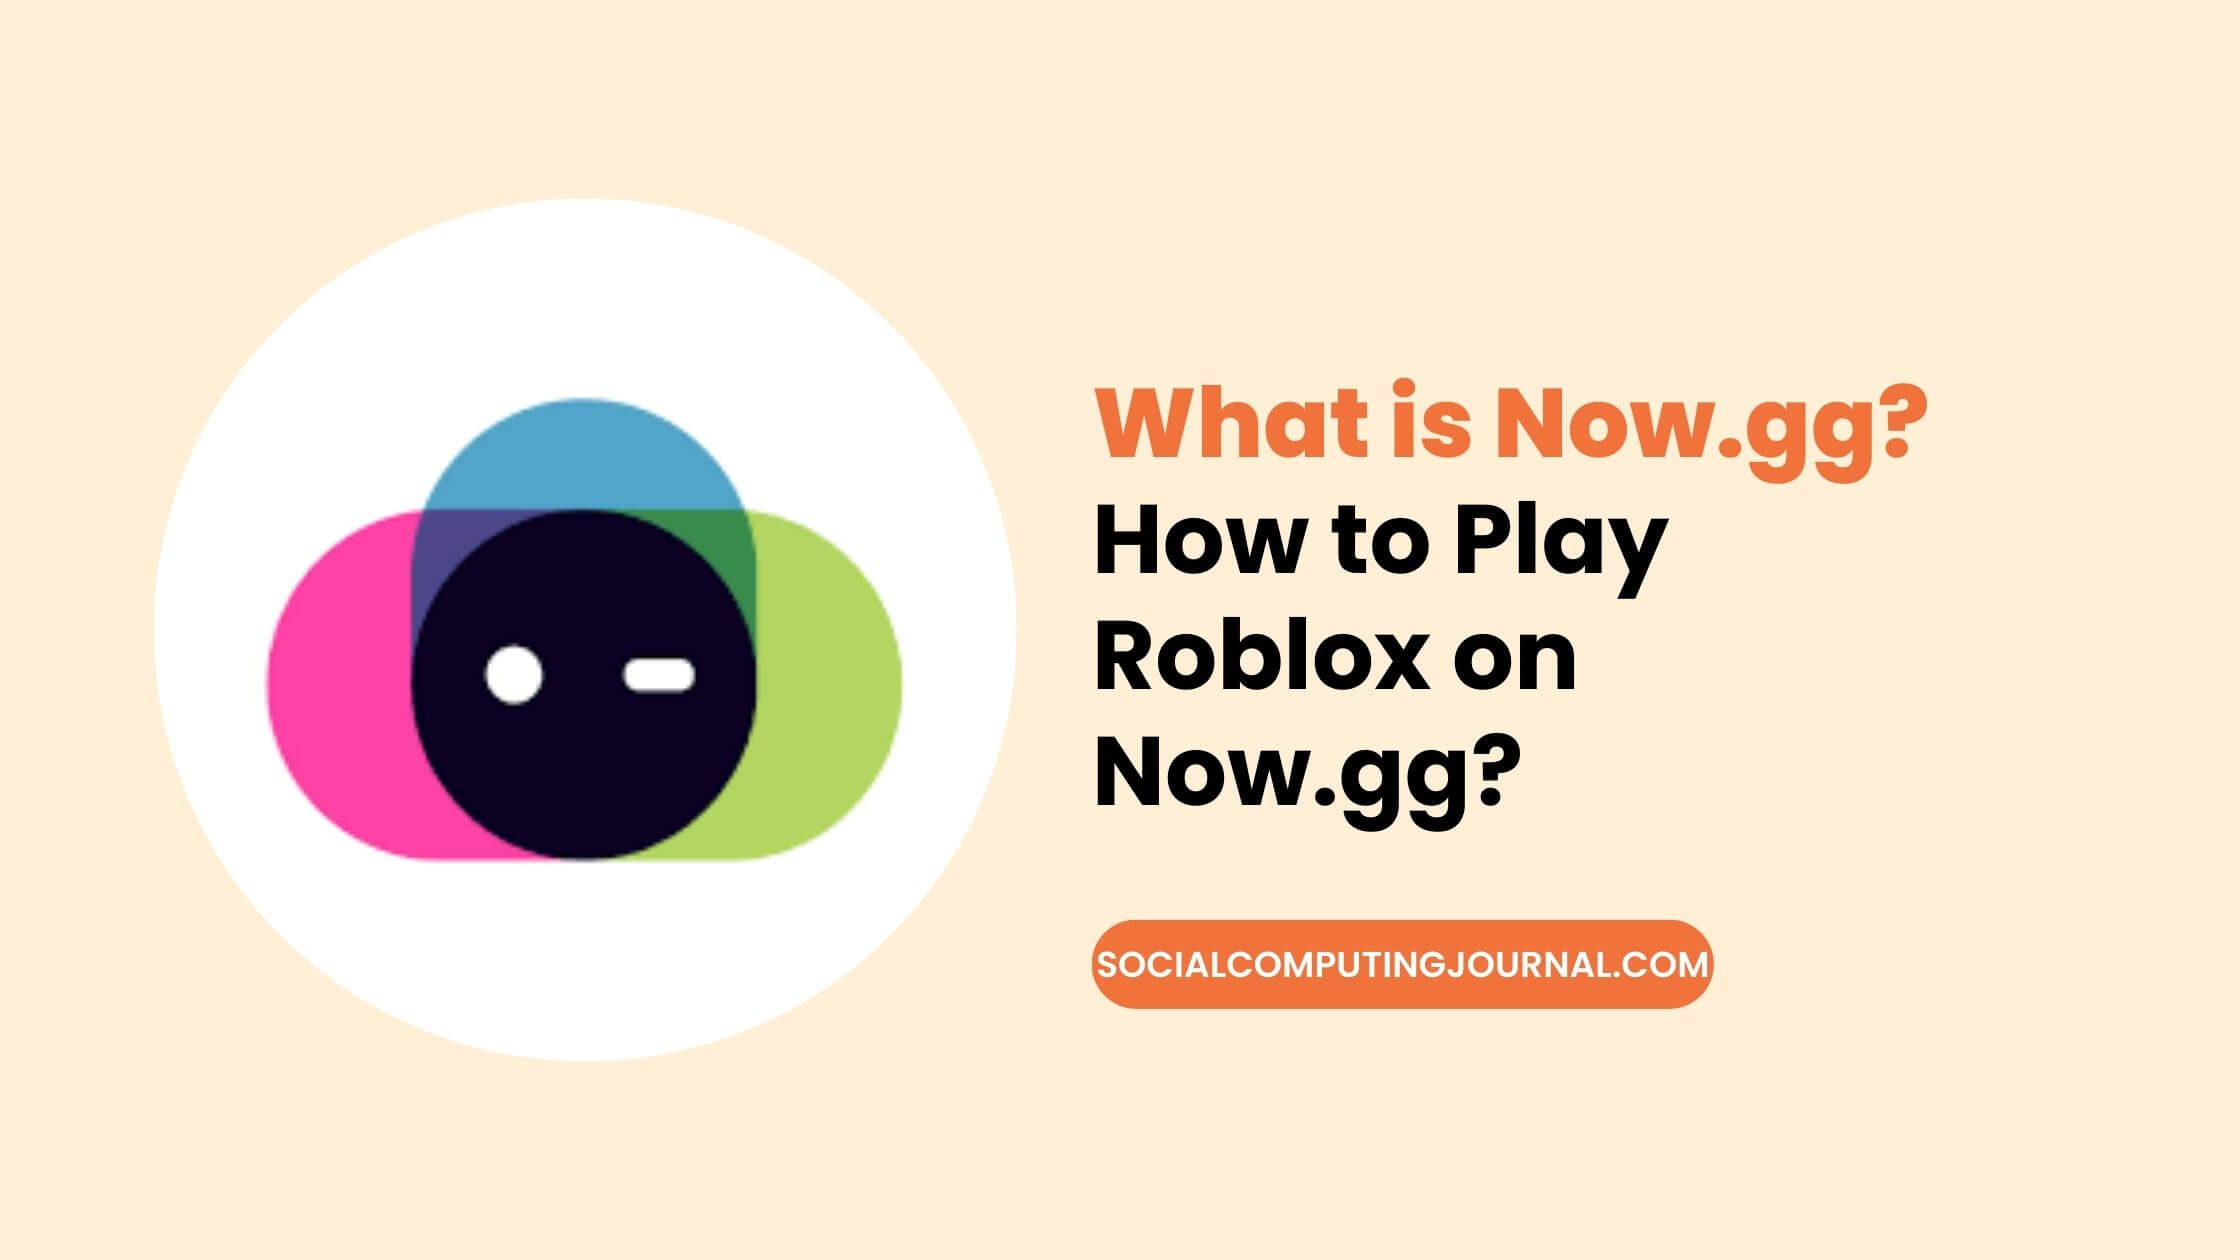 What is Now.gg? How to Play Roblox on it?